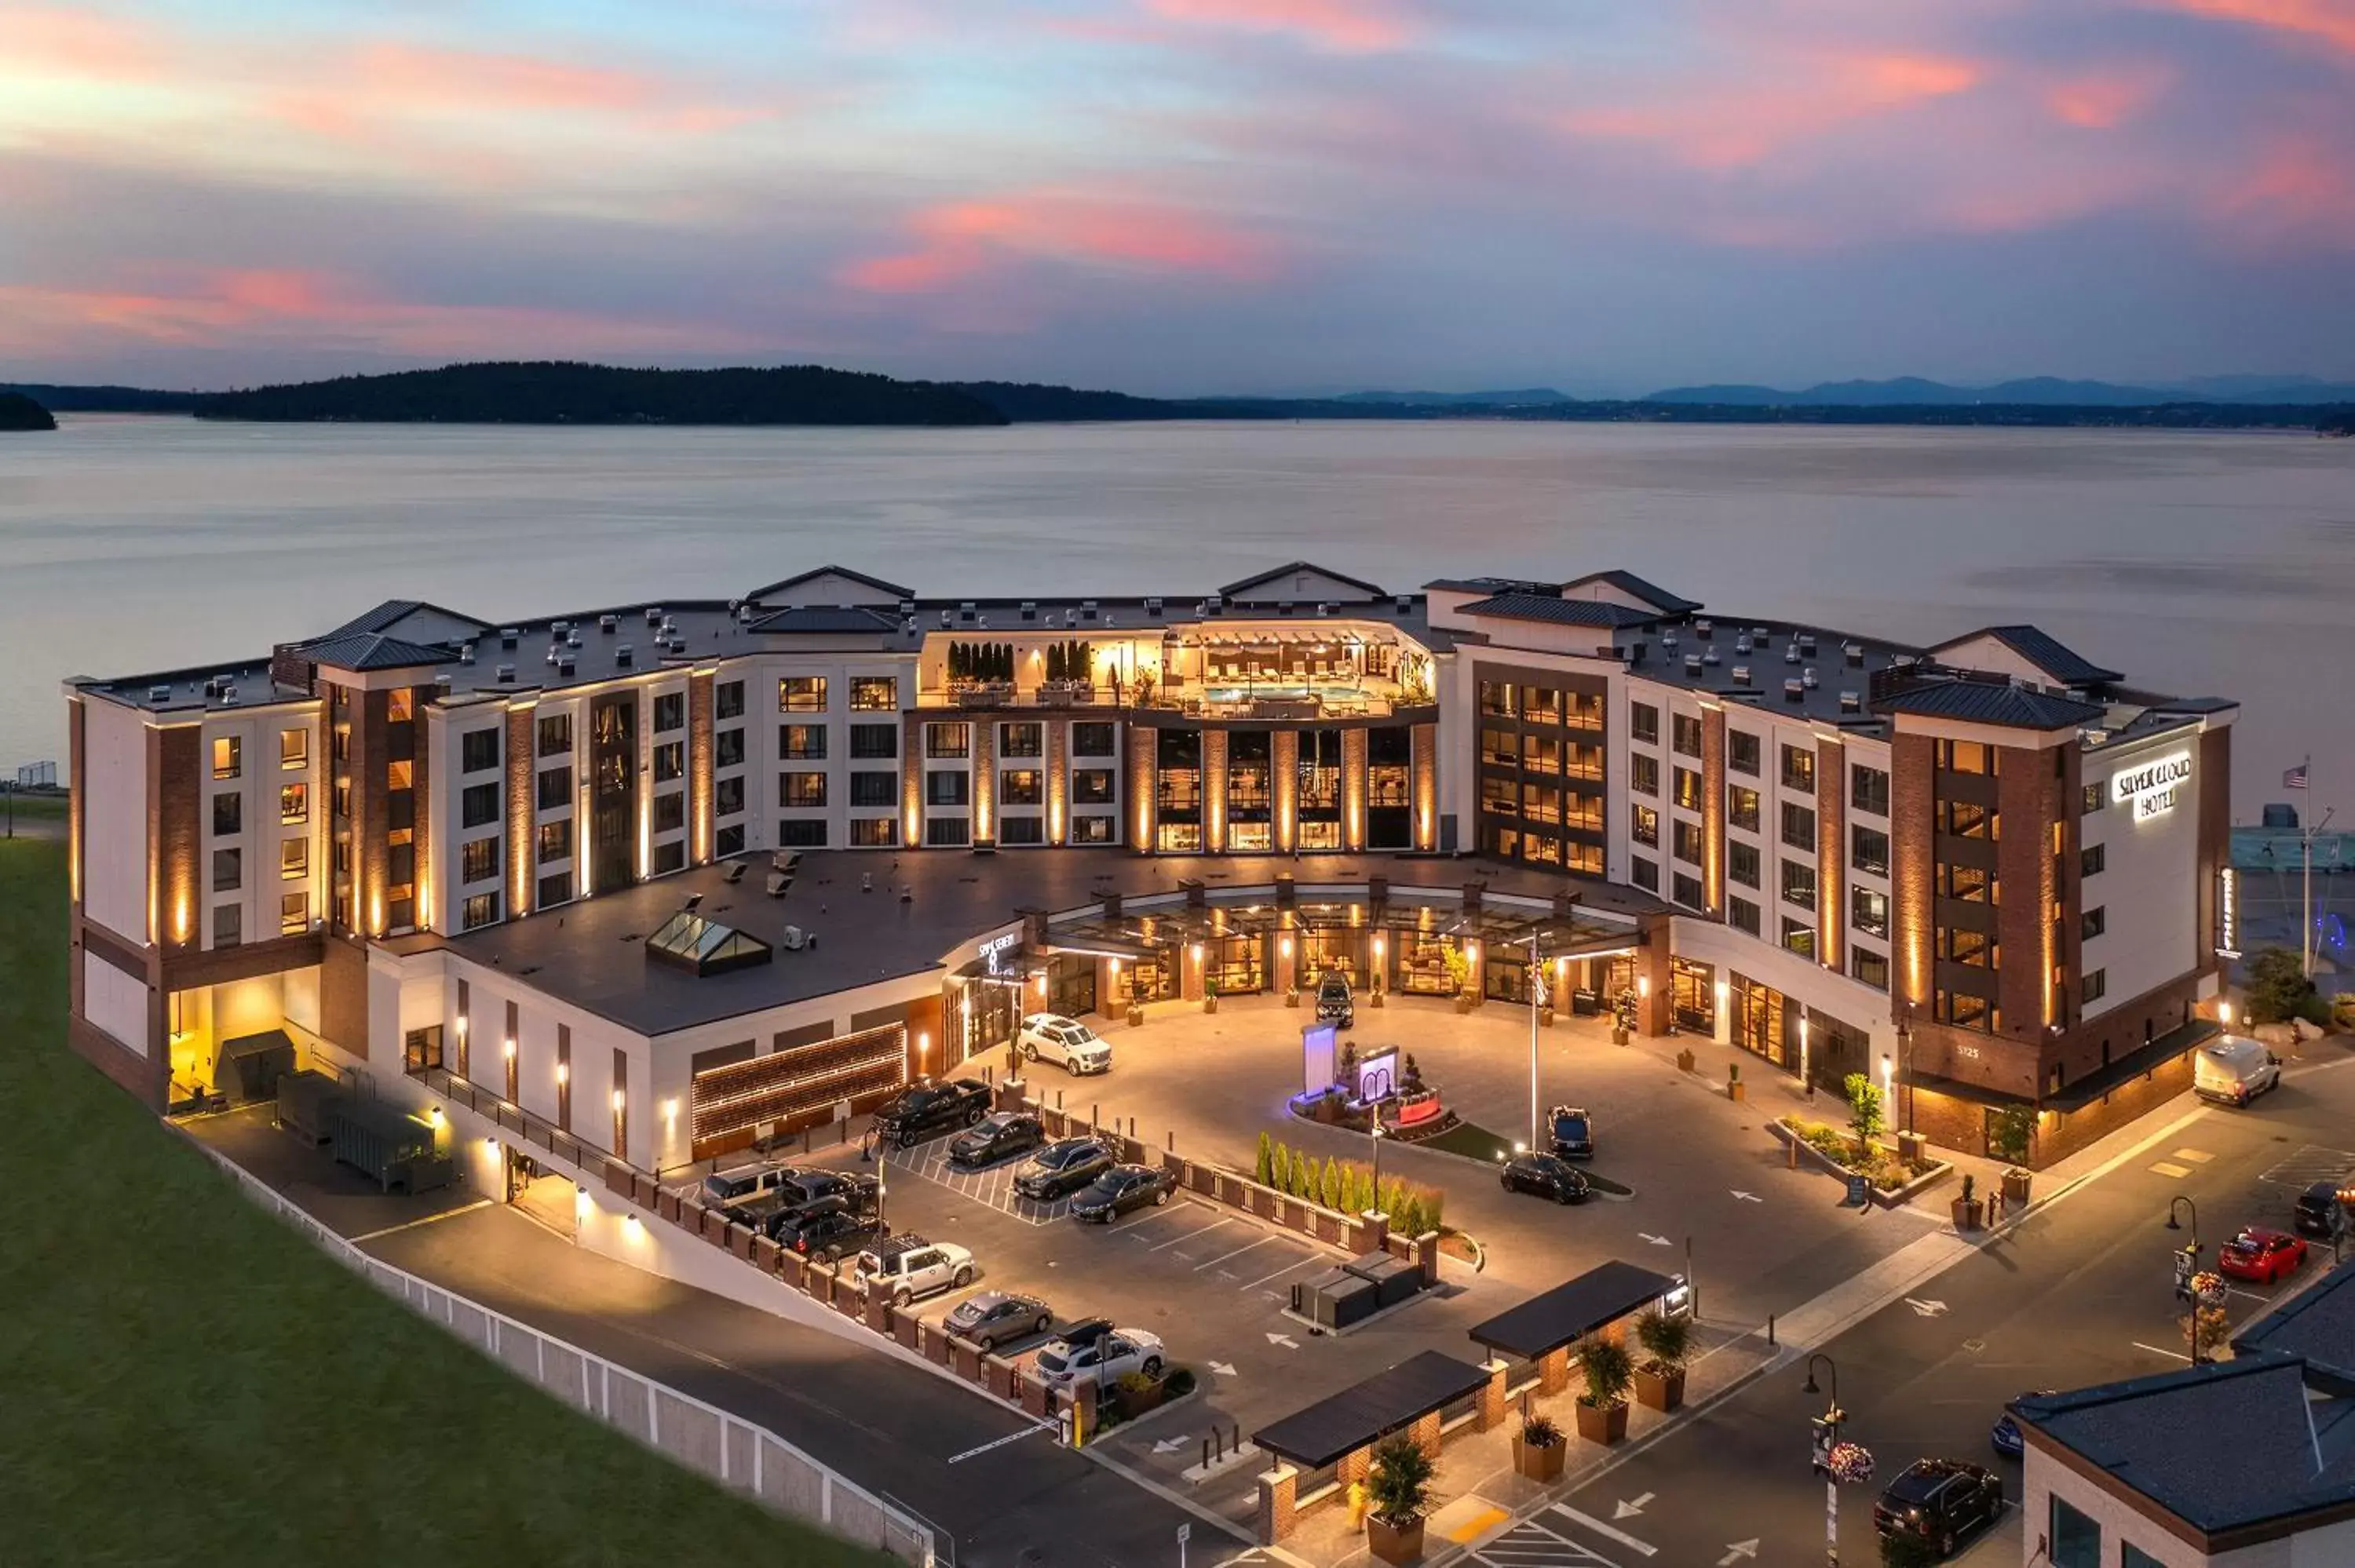 Property building, Bird's-eye View in Silver Cloud Hotel Tacoma at Point Ruston Waterfront